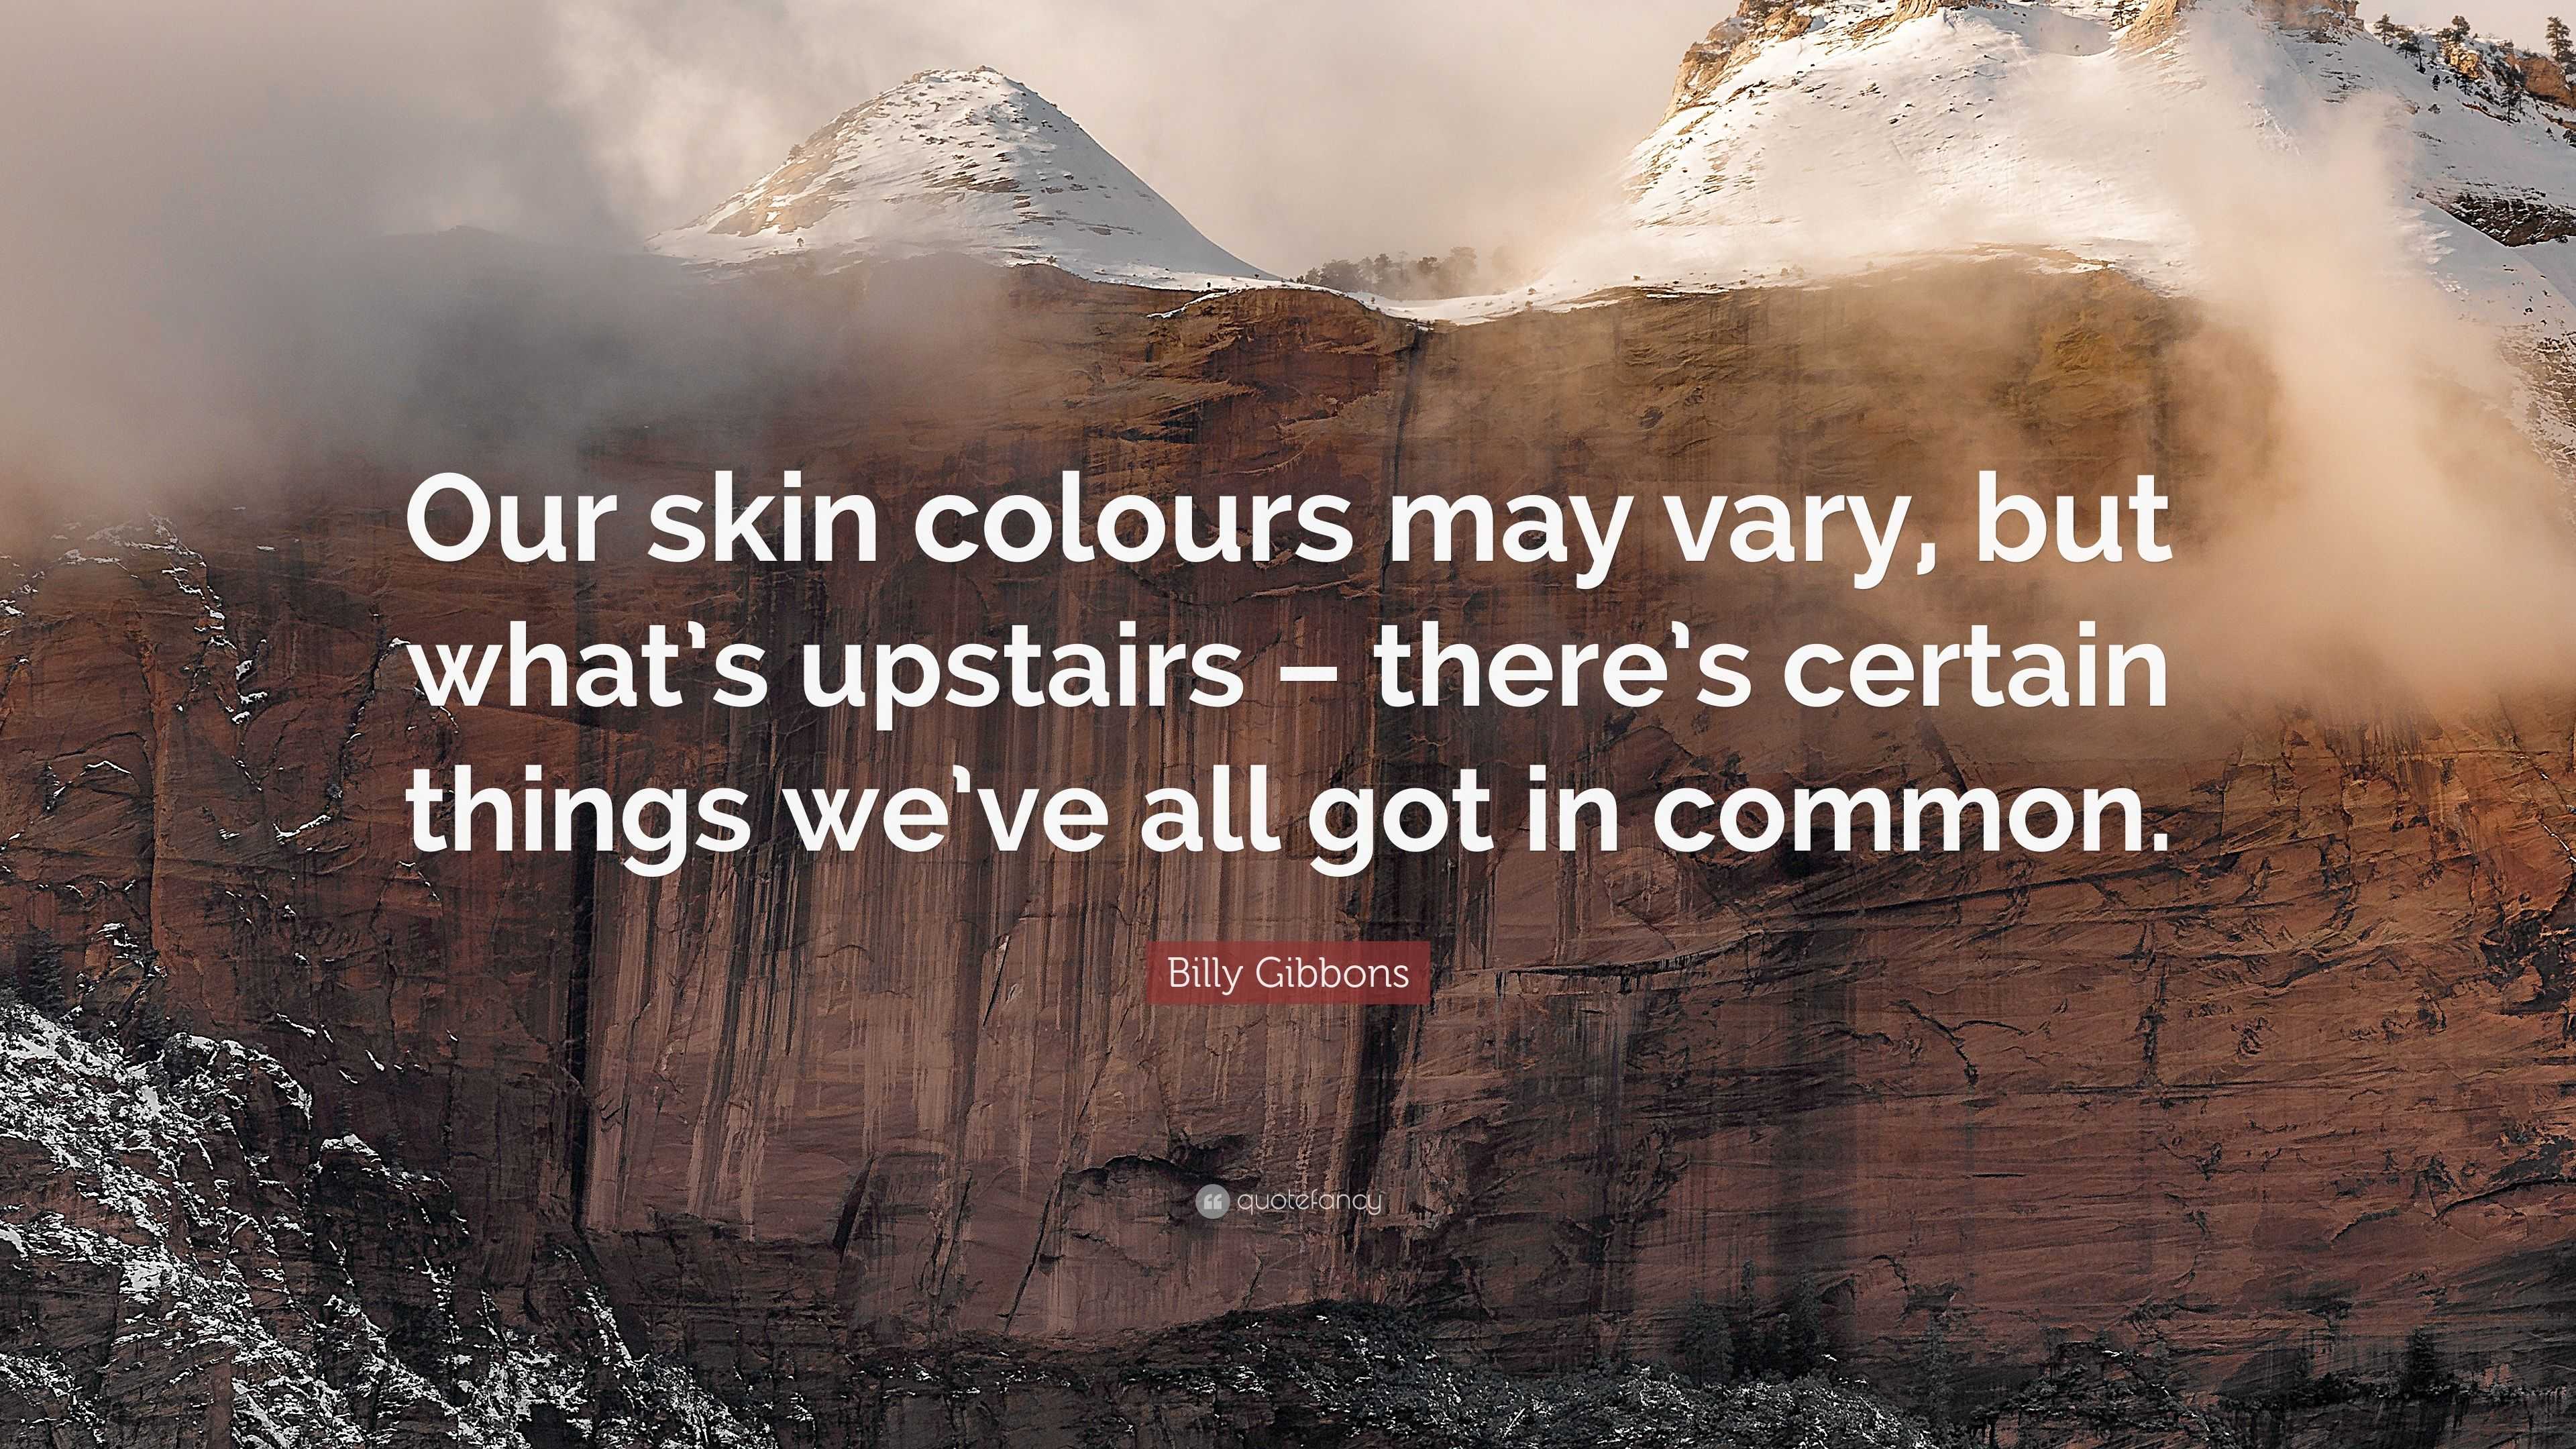 https://quotefancy.com/media/wallpaper/3840x2160/3052548-Billy-Gibbons-Quote-Our-skin-colours-may-vary-but-what-s-upstairs.jpg